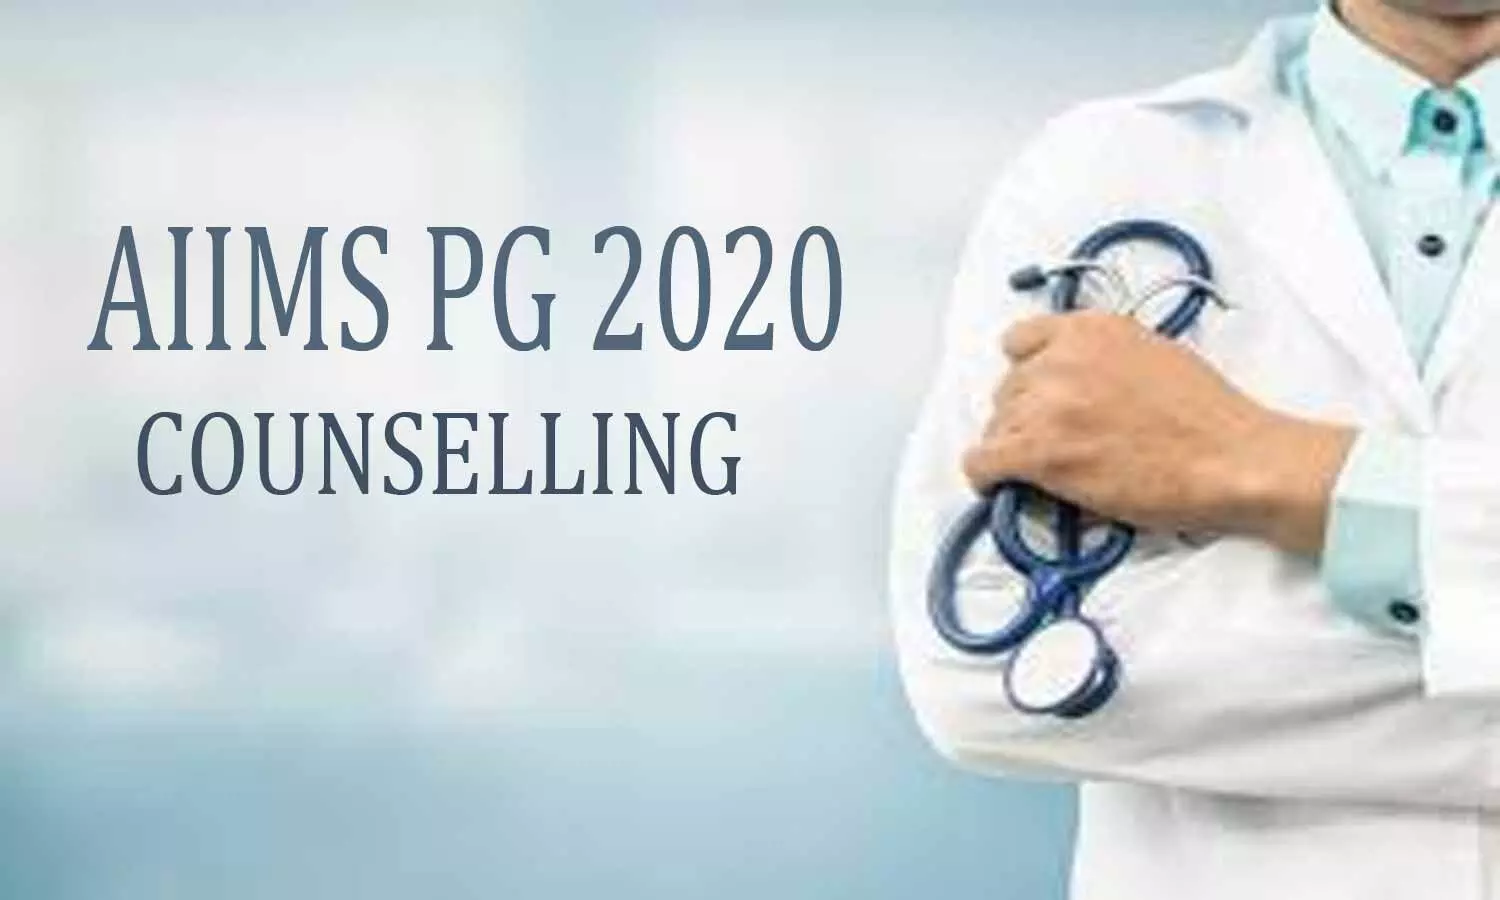 AIIMS PG 2020 Open Round Counselling: 224 seats up for grabs, Final seat position, guidelines released